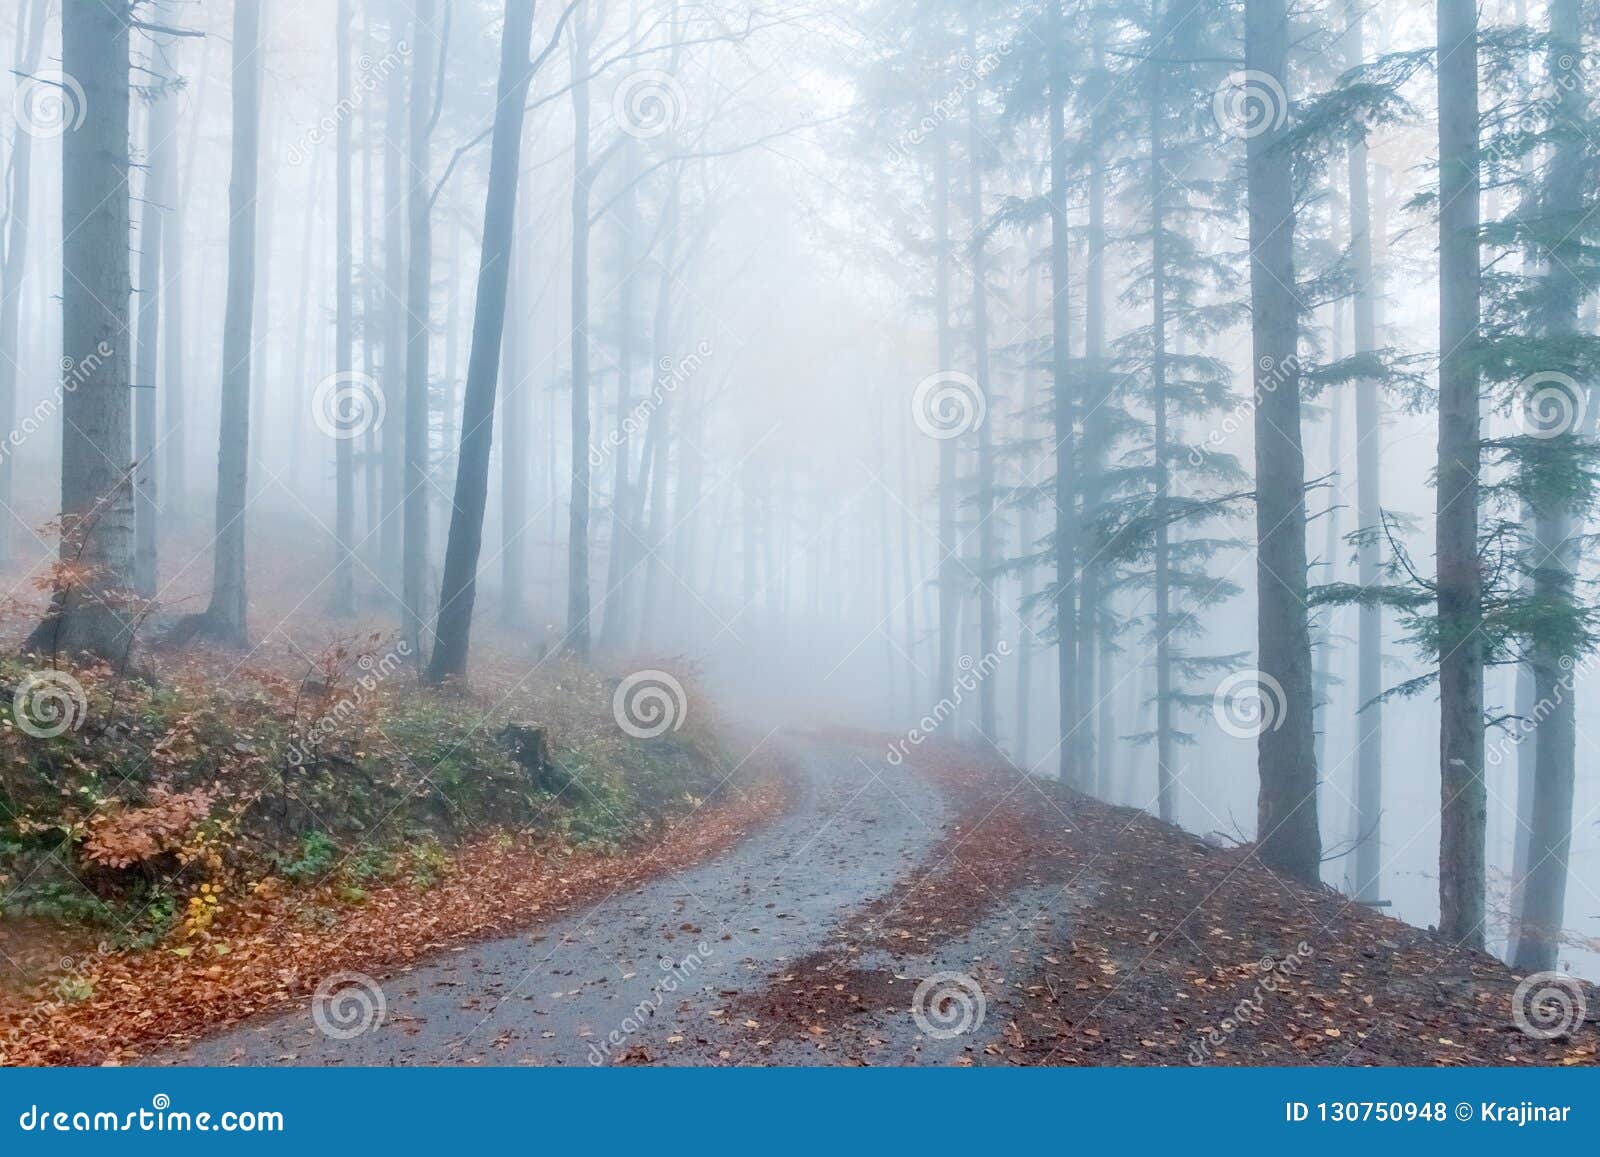 Mysterious Autumn Europian Forest with Dark Atmosfere with Fog, Czech